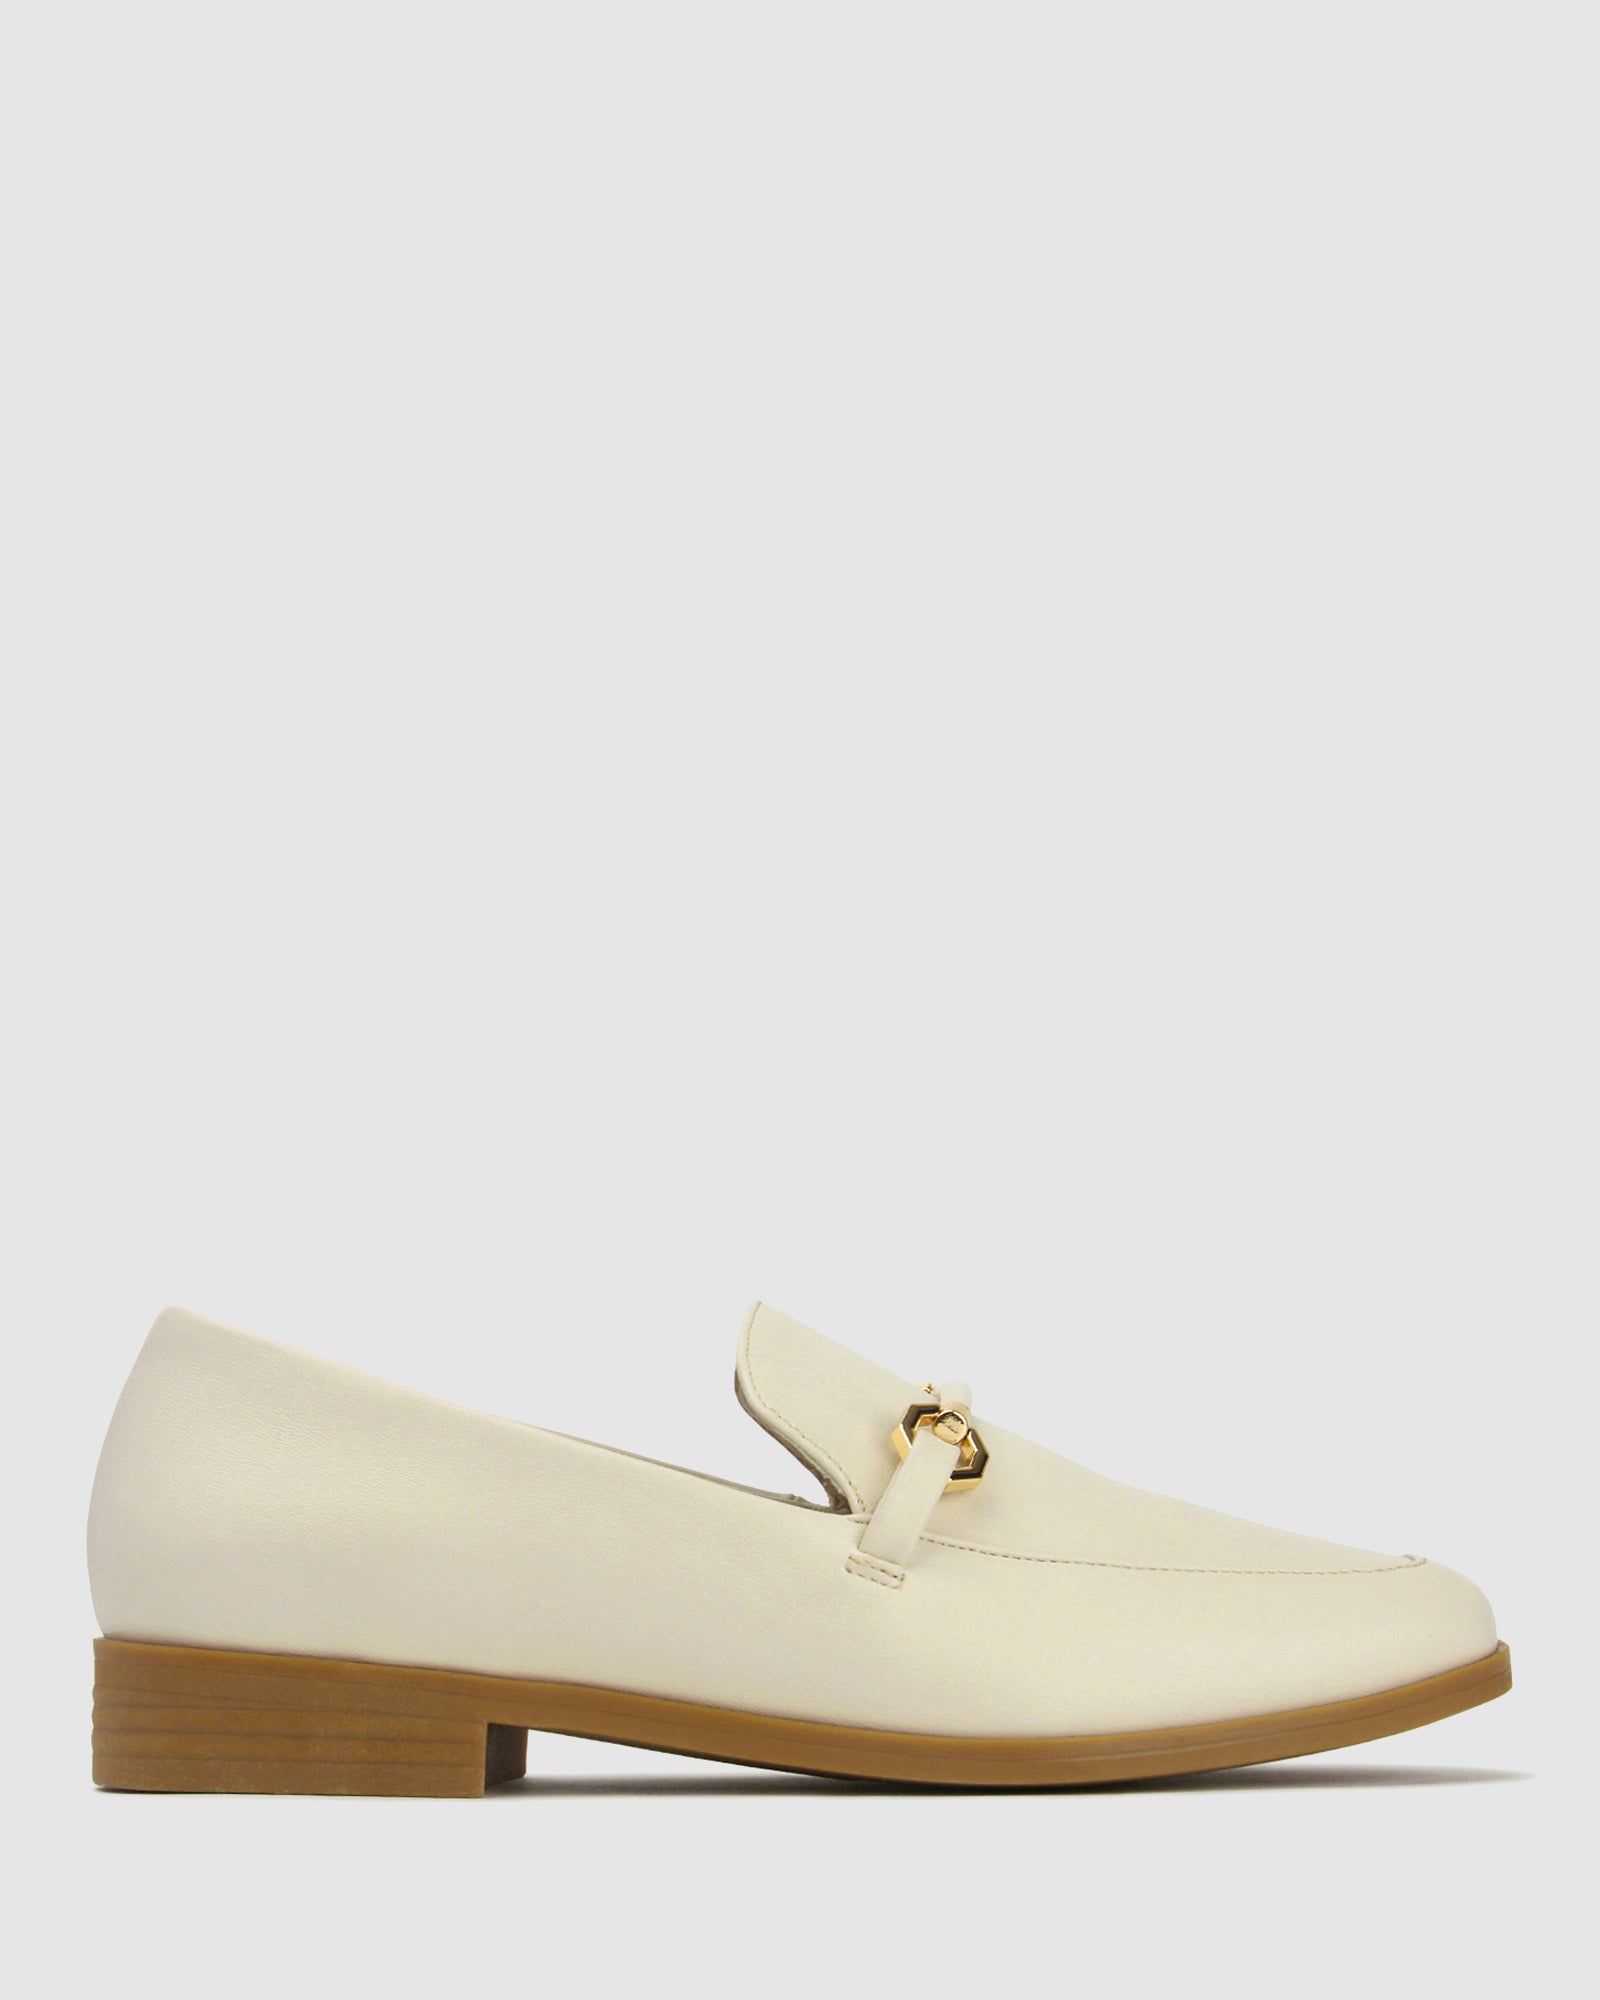 Buy BIANCA Square Toe Classic Loafers by Zeroe online - Betts